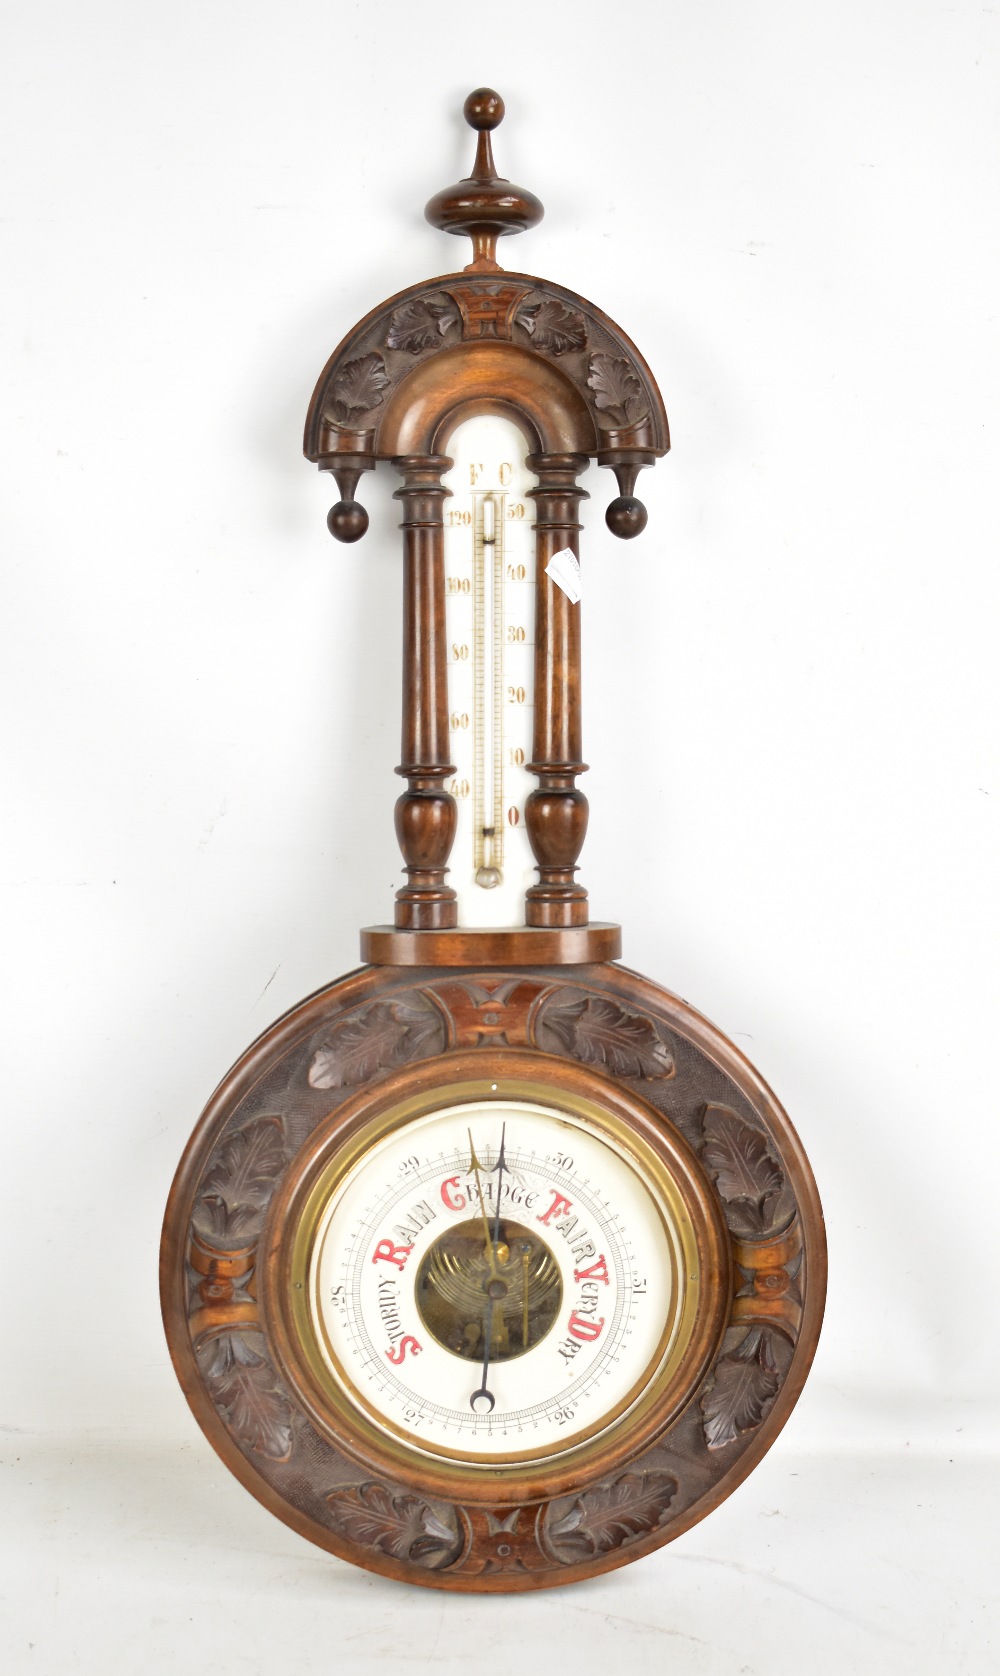 A circa 1900 carved walnut and beech wheel barometer with relief carved detail and upper